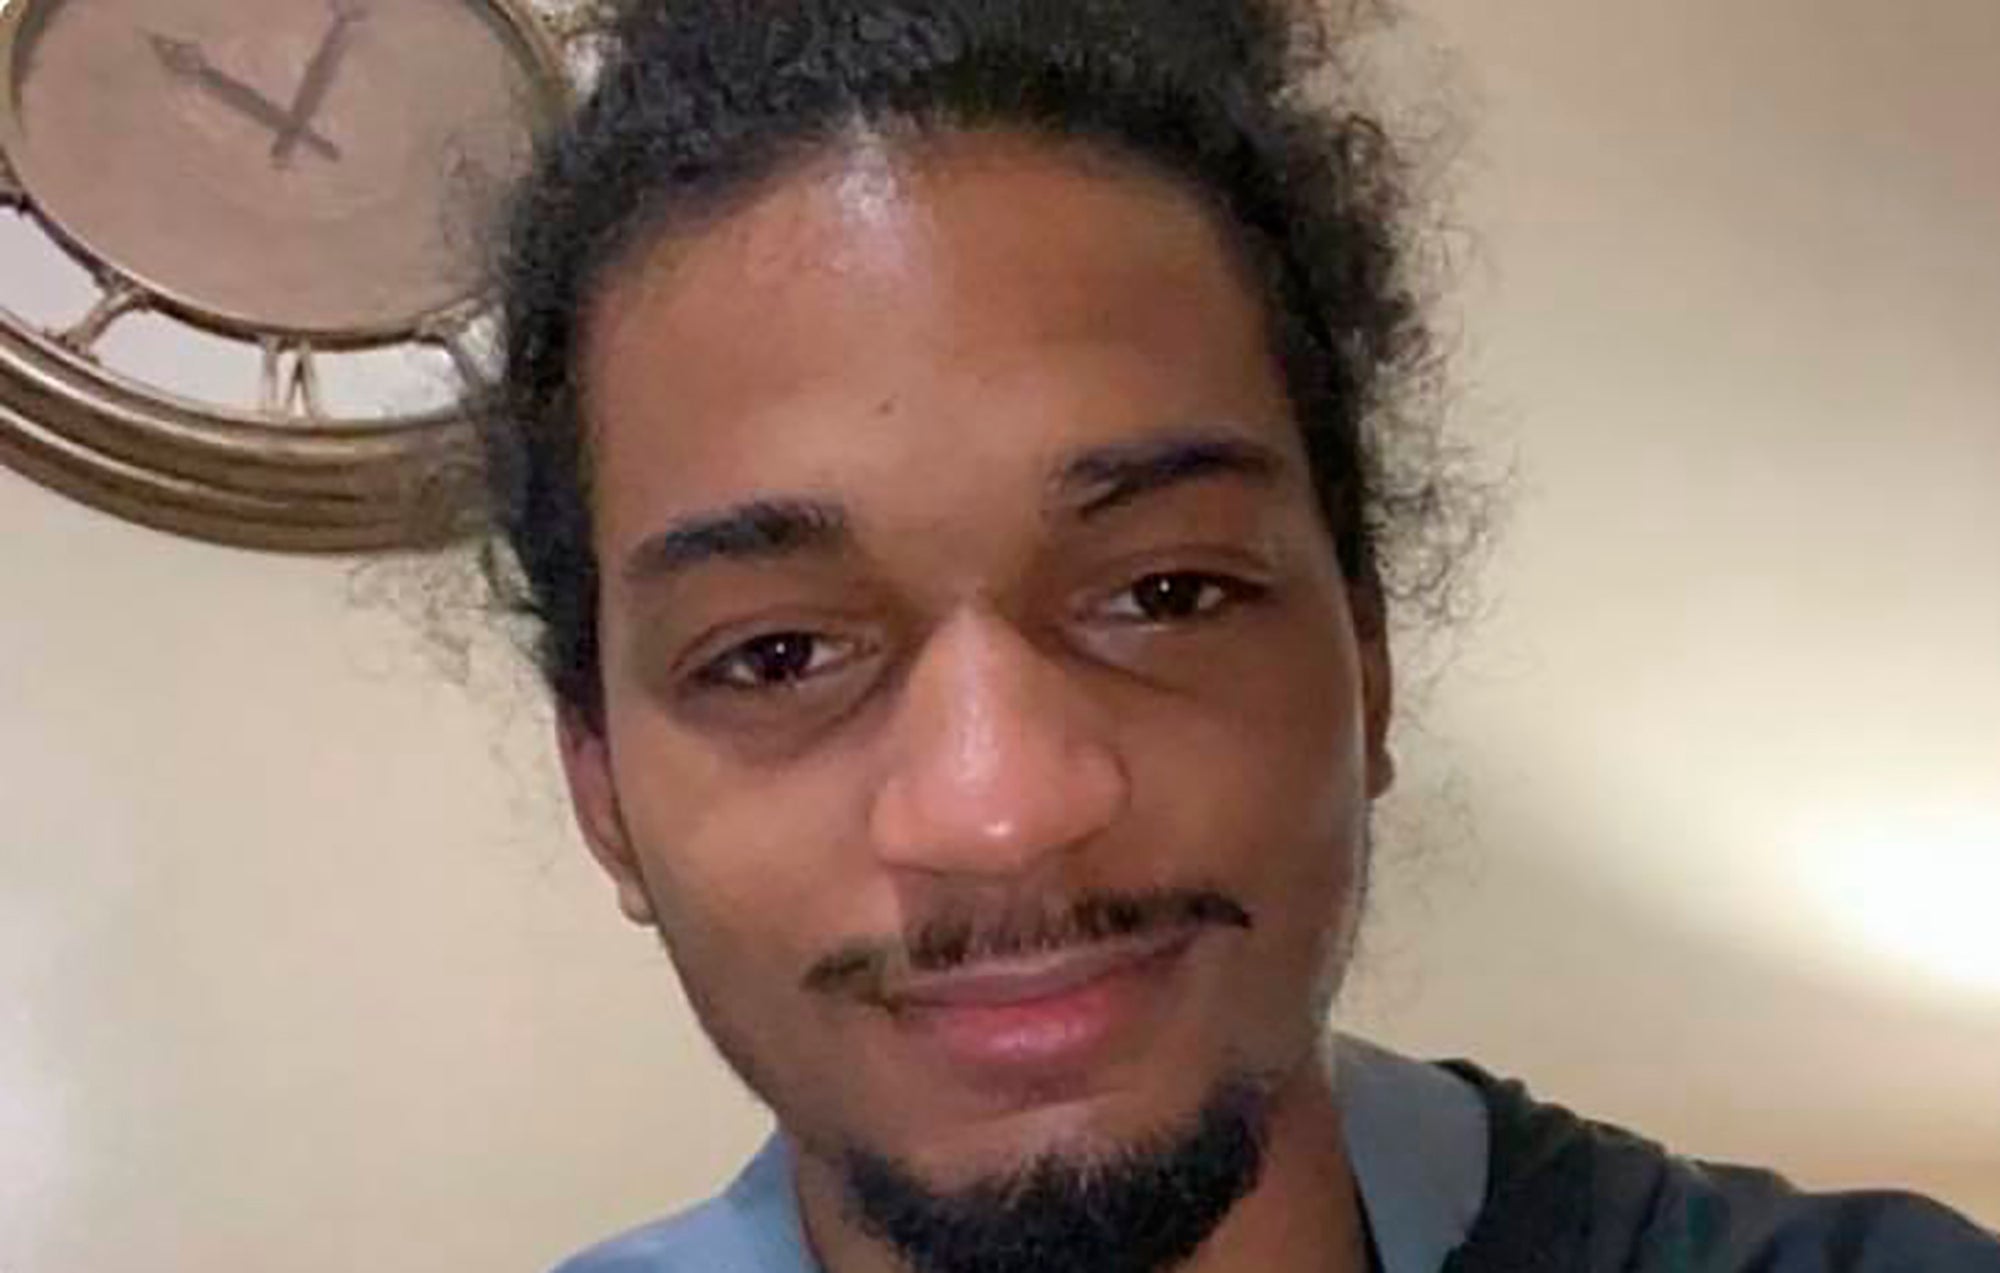 The fatal shooting of 23-year-old Goodson by an Ohio sheriff's deputy on Friday, 4 December 2020, is now under investigation by the state’s criminal investigation bureau